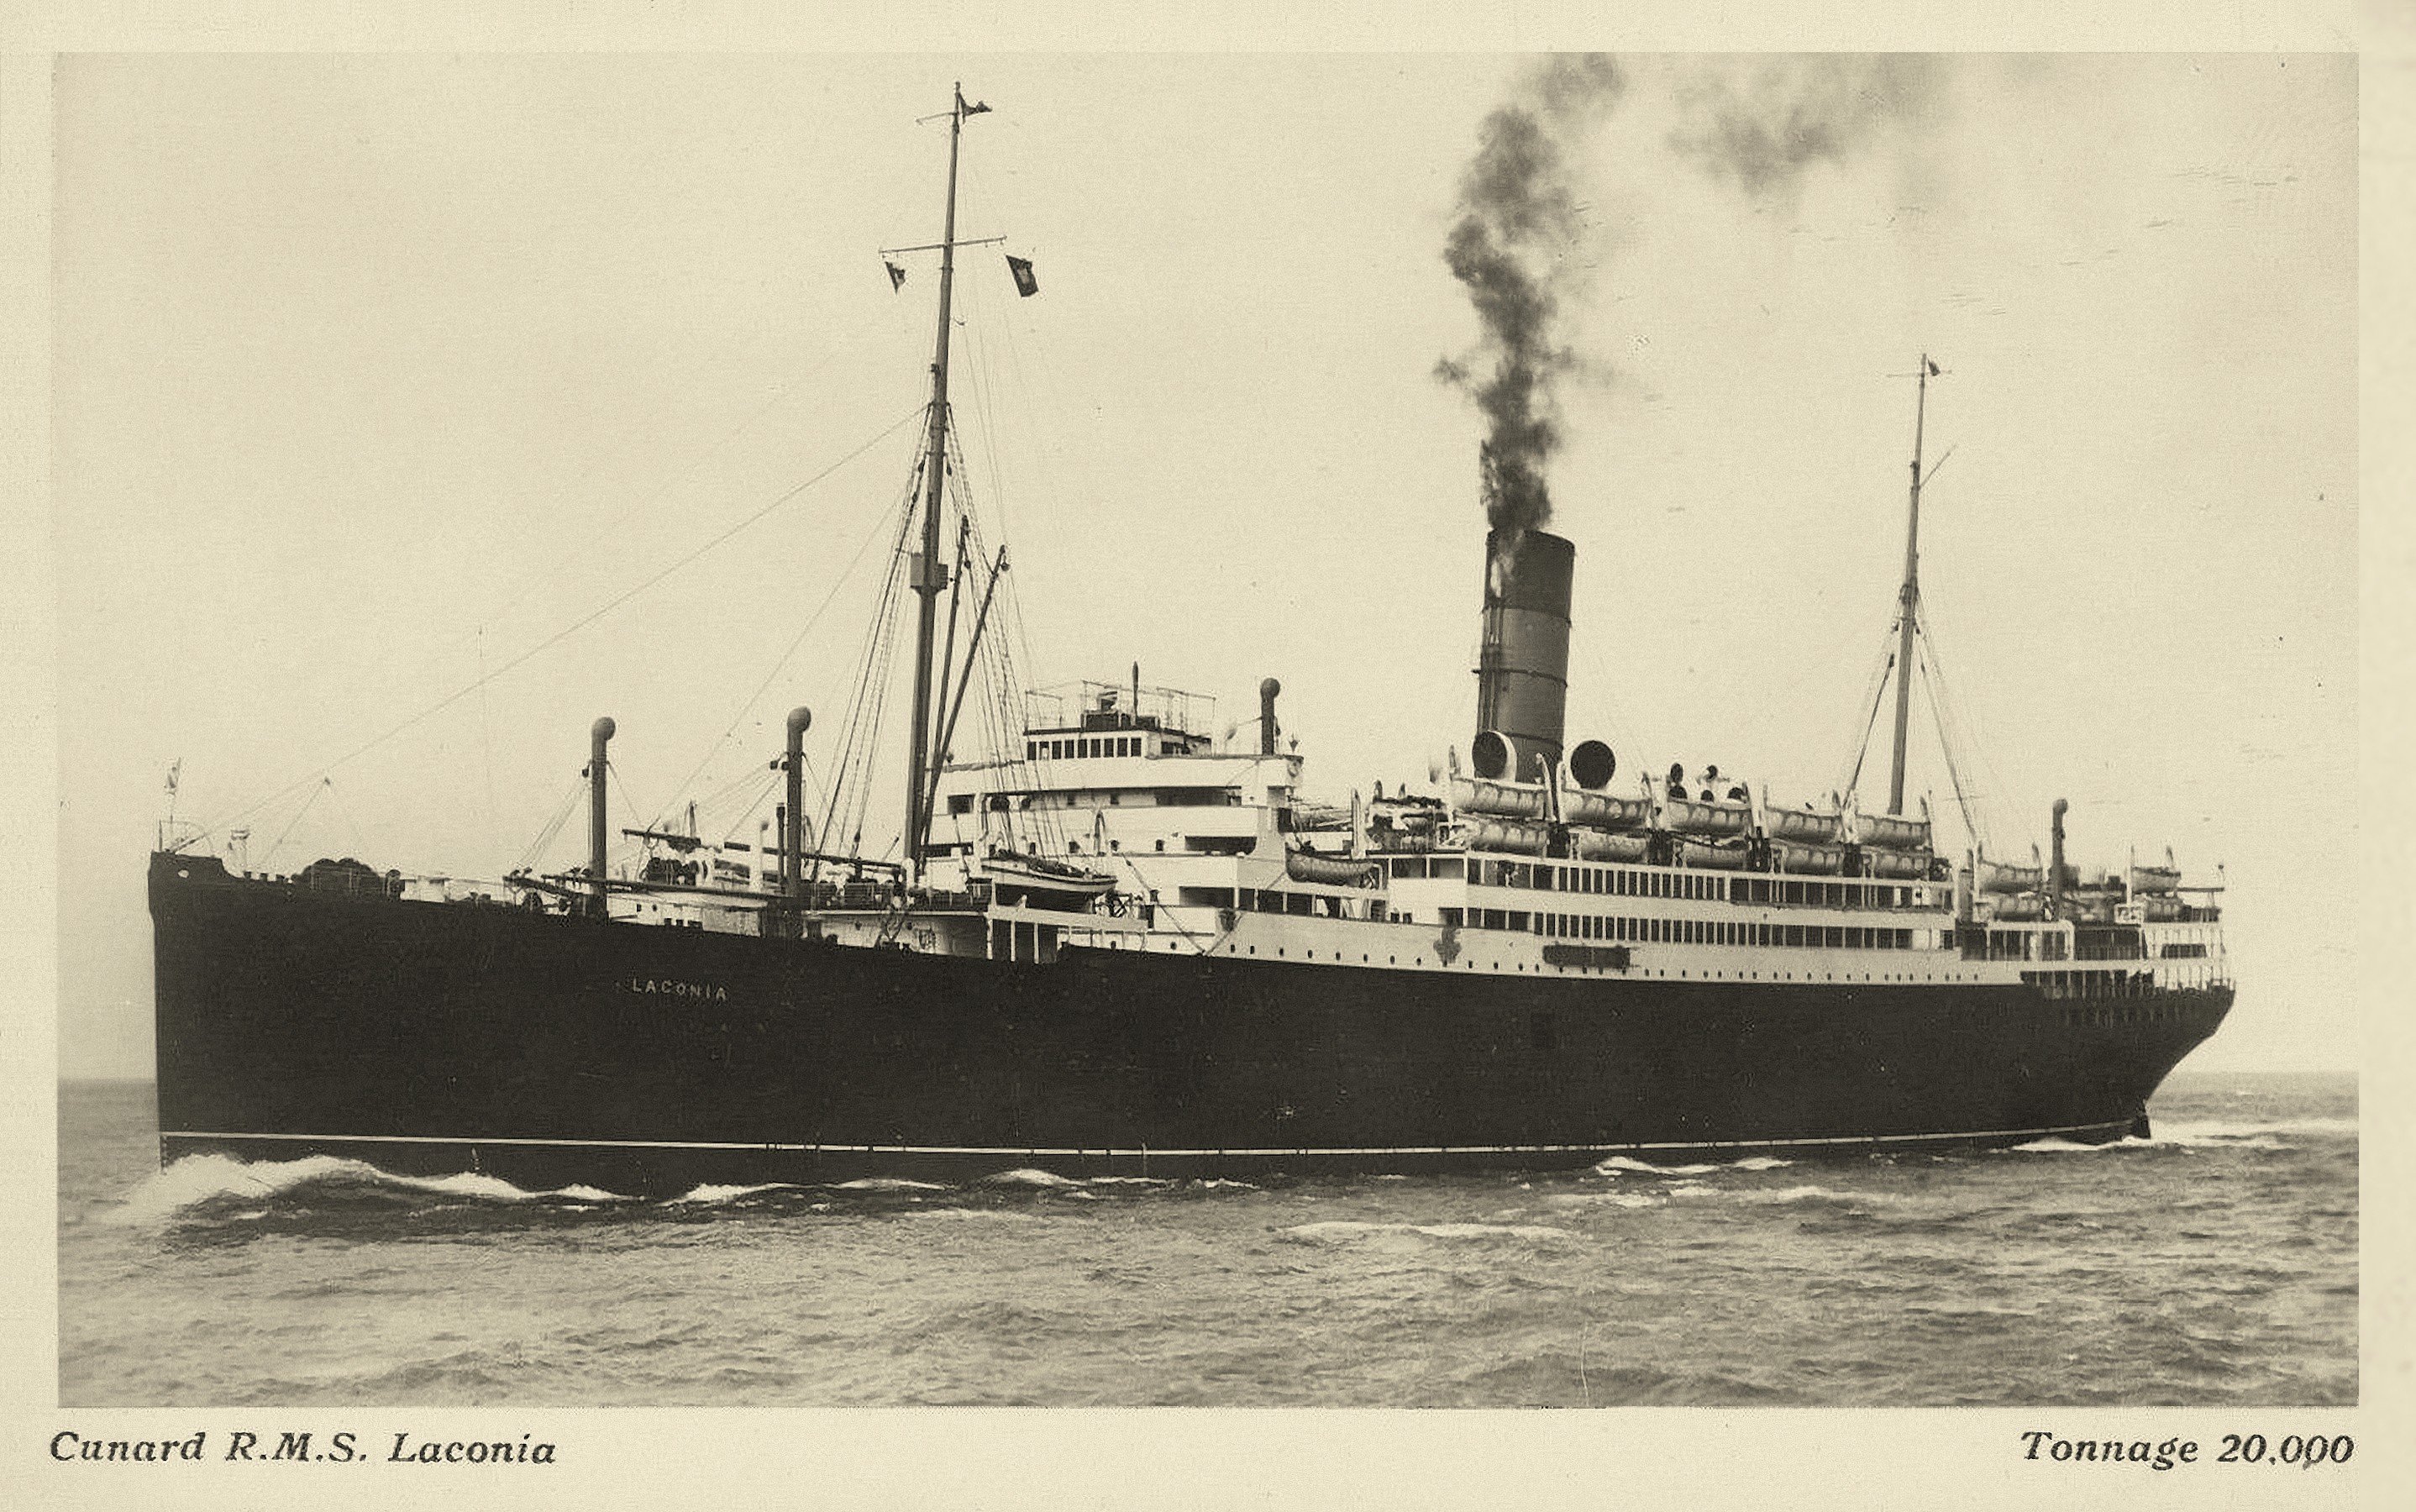 The RMS Laconia, the first ship to sail around the world ‘purely for the purposes of pleasure’.